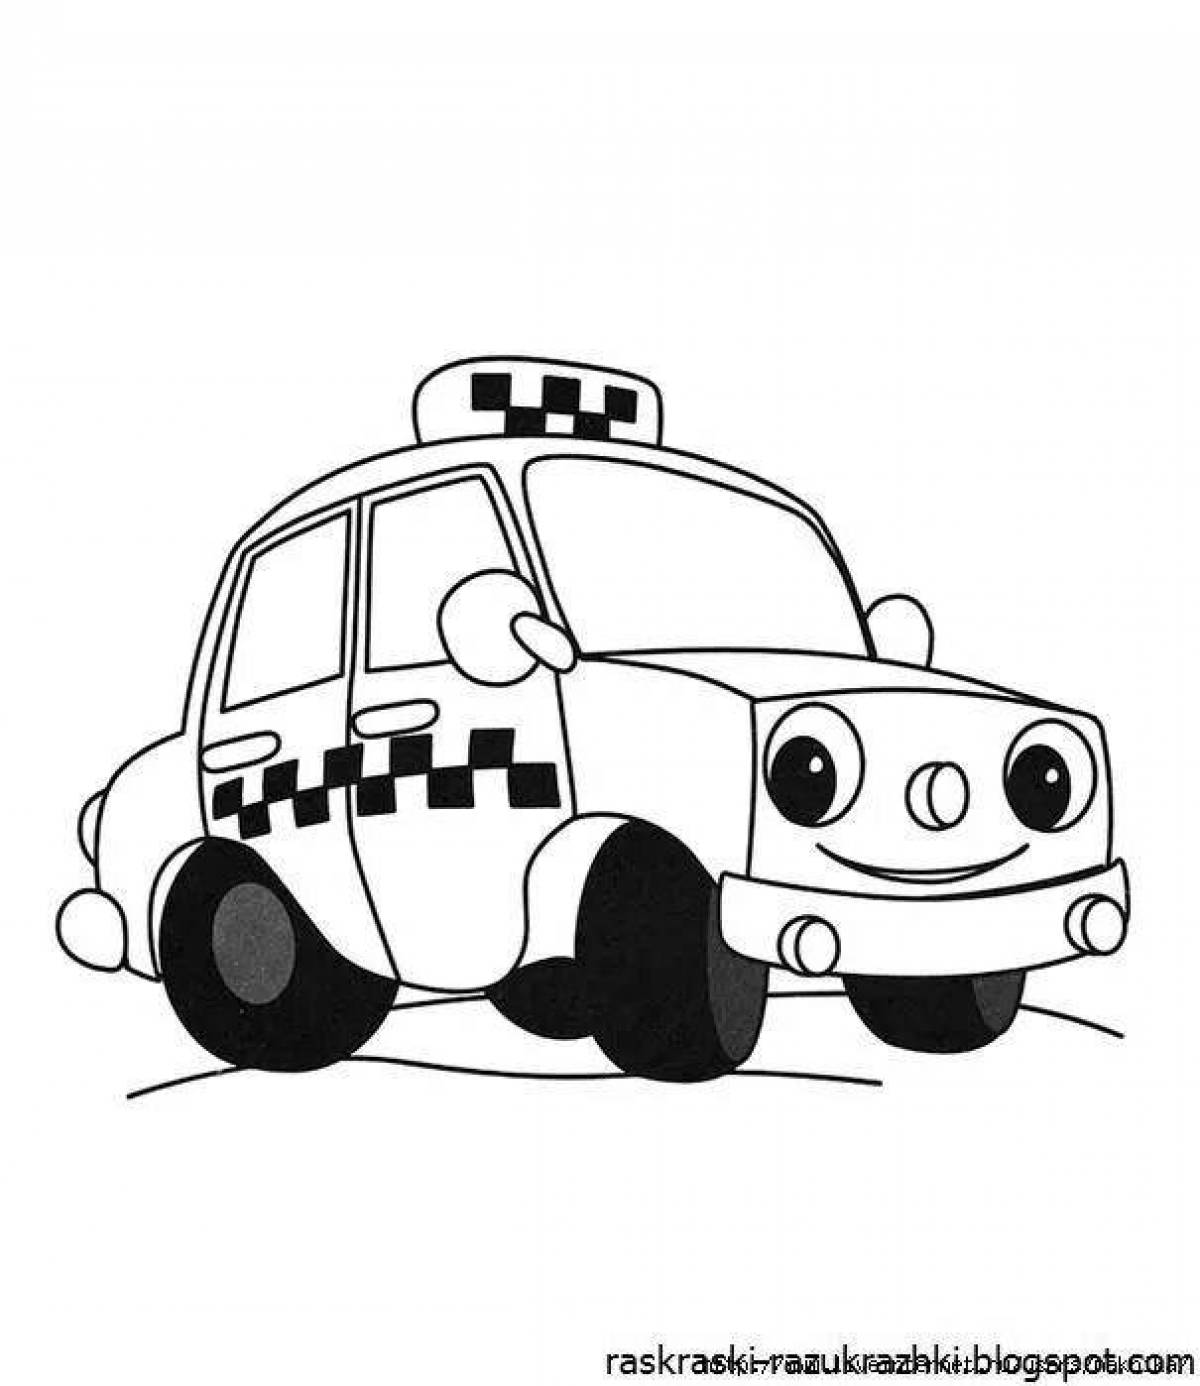 Exciting taxi coloring book for preschoolers